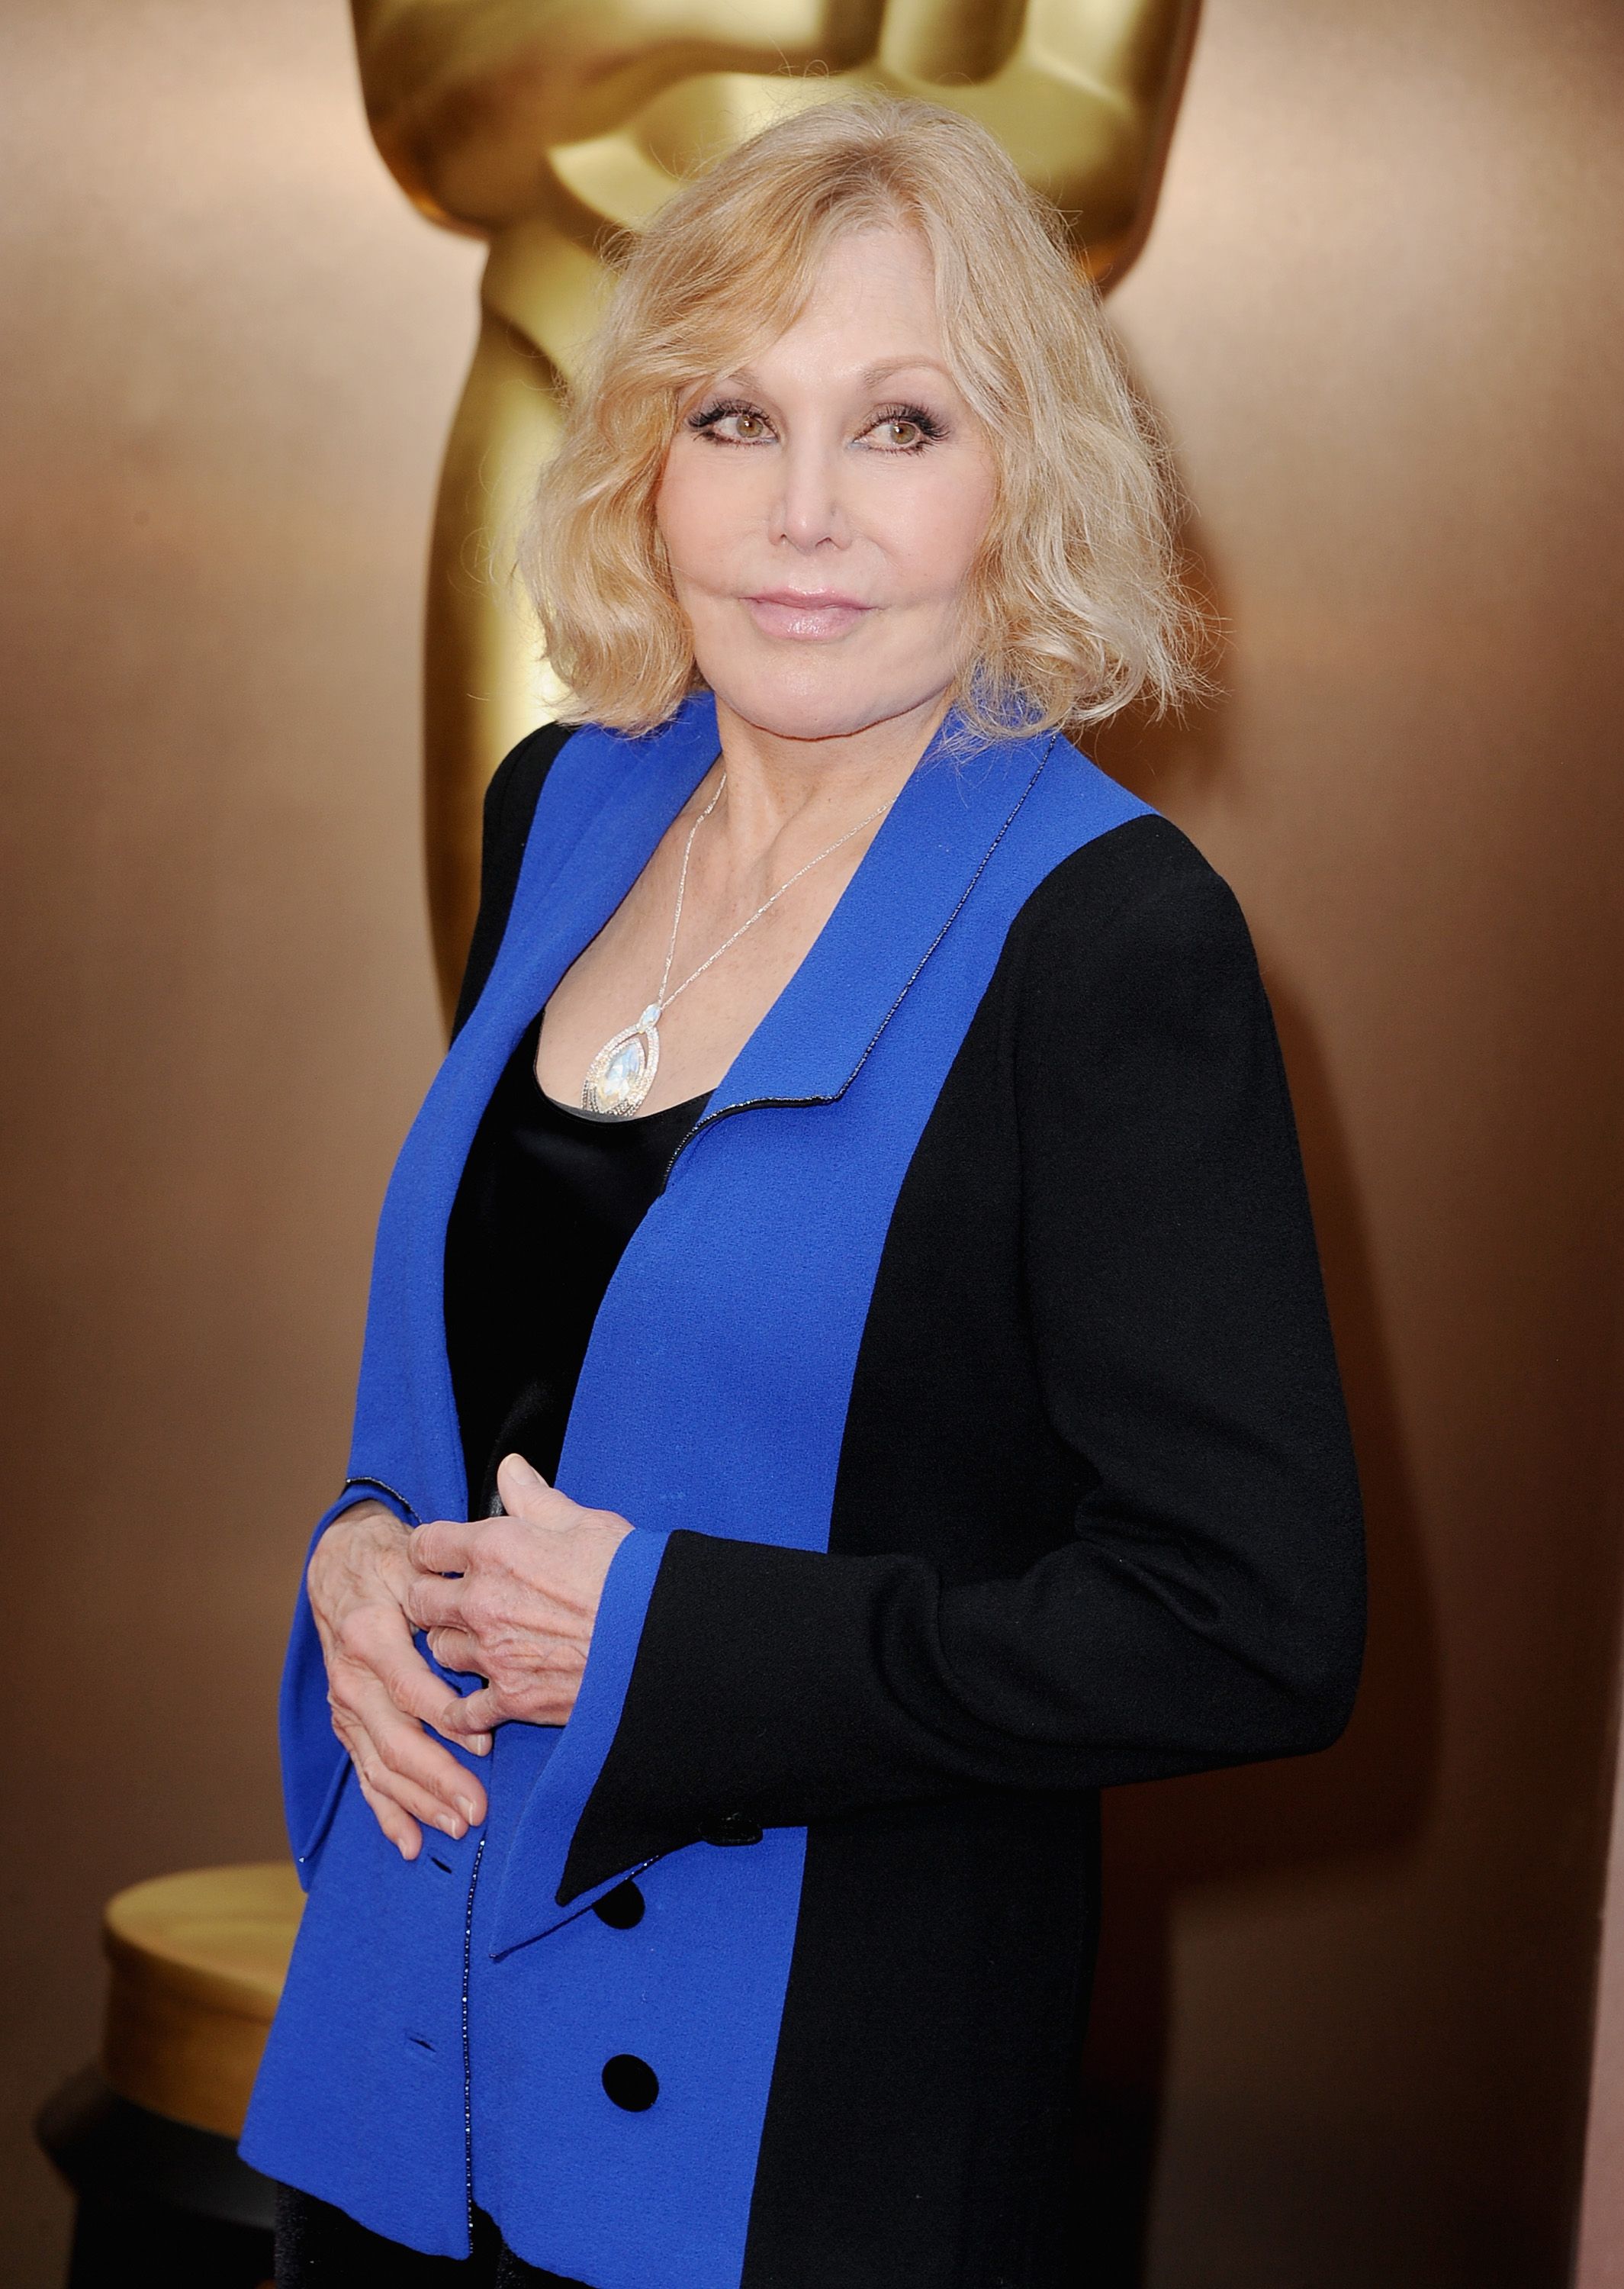 Kim Novak at the Oscars held at Hollywood & Highland Center on March 2, 2014, in Hollywood, California | Photo: Steve Granitz/WireImage/Getty Images